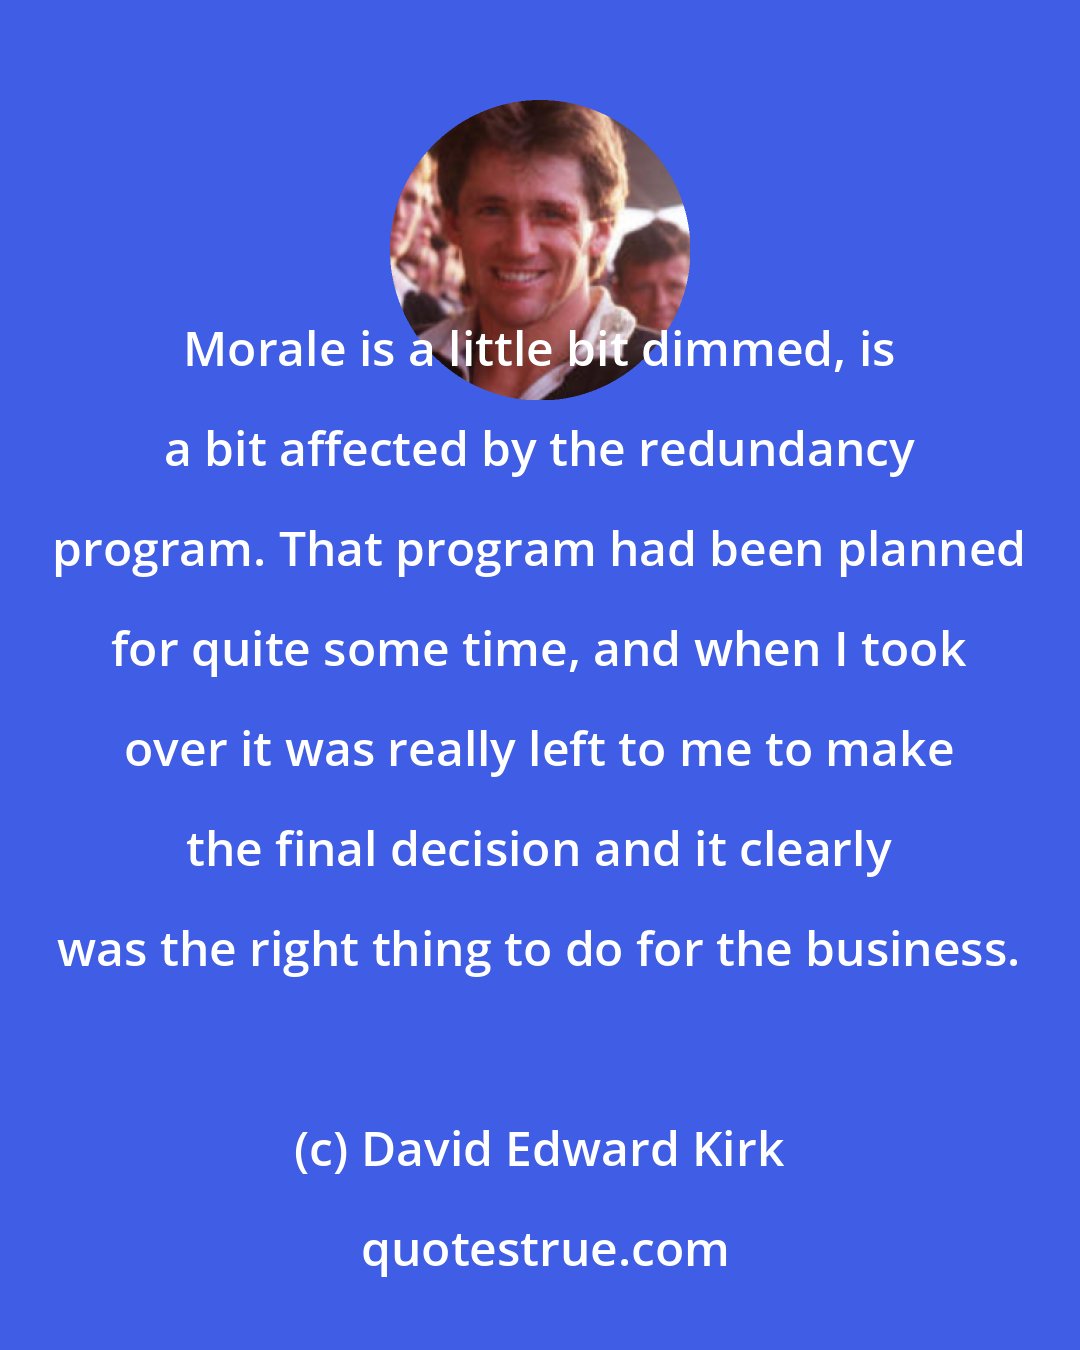 David Edward Kirk: Morale is a little bit dimmed, is a bit affected by the redundancy program. That program had been planned for quite some time, and when I took over it was really left to me to make the final decision and it clearly was the right thing to do for the business.